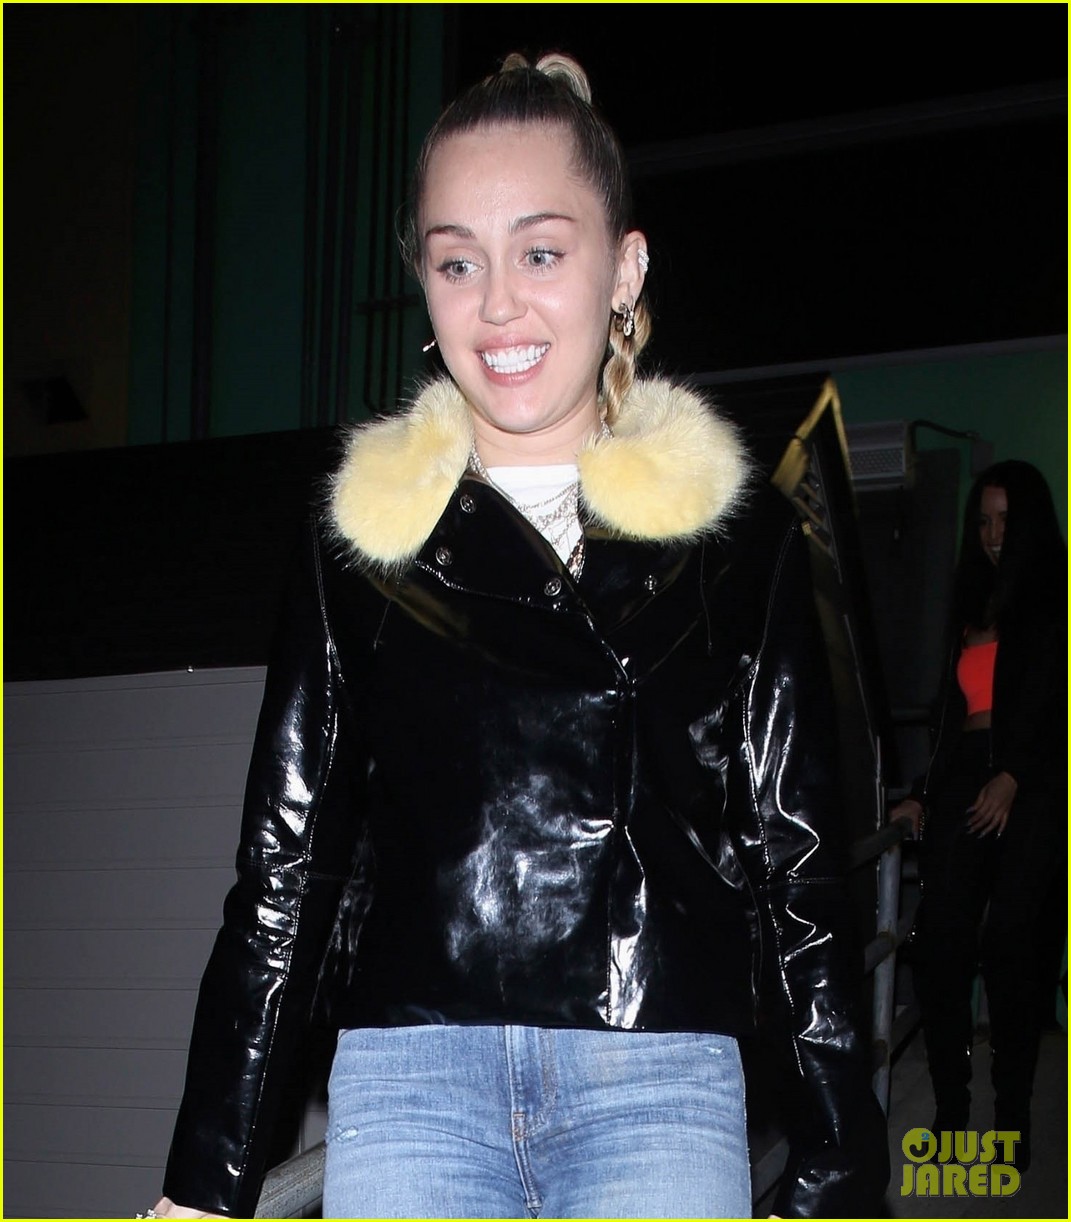 miley cyrus at tomtom 08